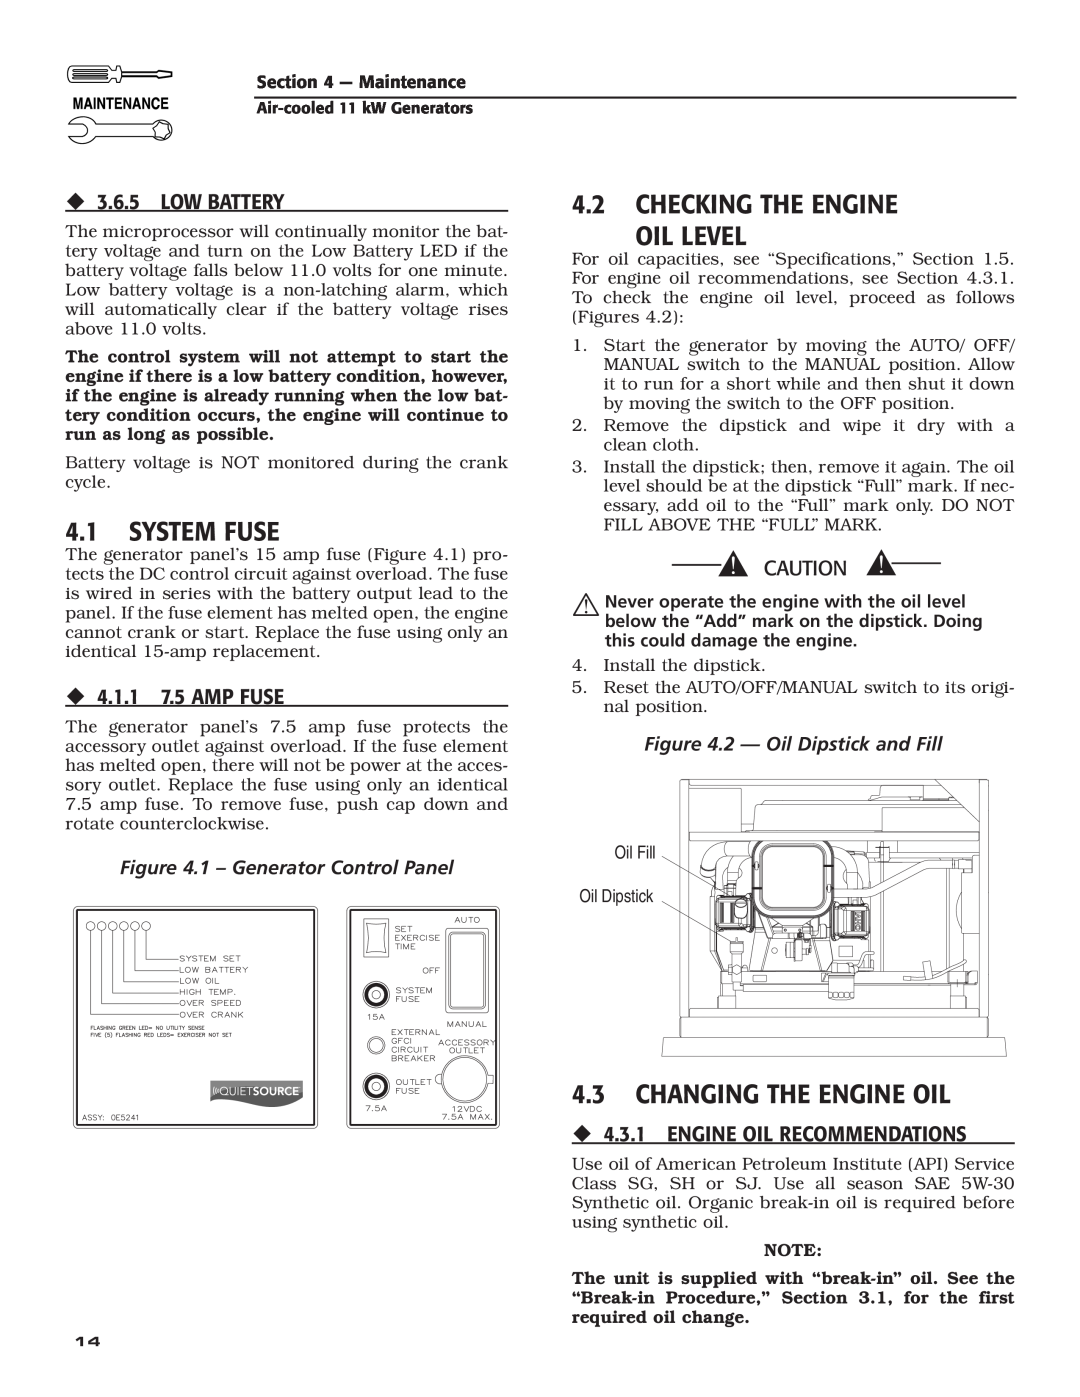 Generac Power Systems 004916-0 System Fuse, Checking The Engine Oil Level, Changing The Engine Oil, ‹ 3.6.5 LOW BATTERY 